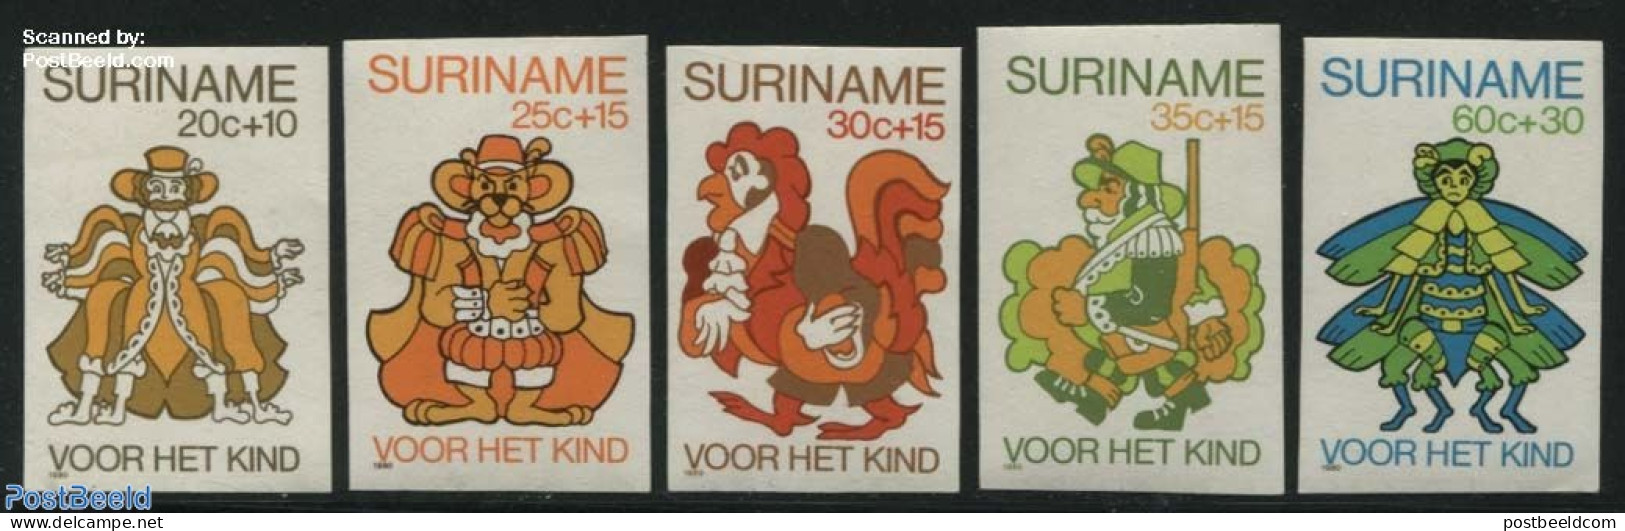 Suriname, Republic 1980 Child Welfare 5v, Imperforated, Mint NH, Nature - Insects - Poultry - Surinam